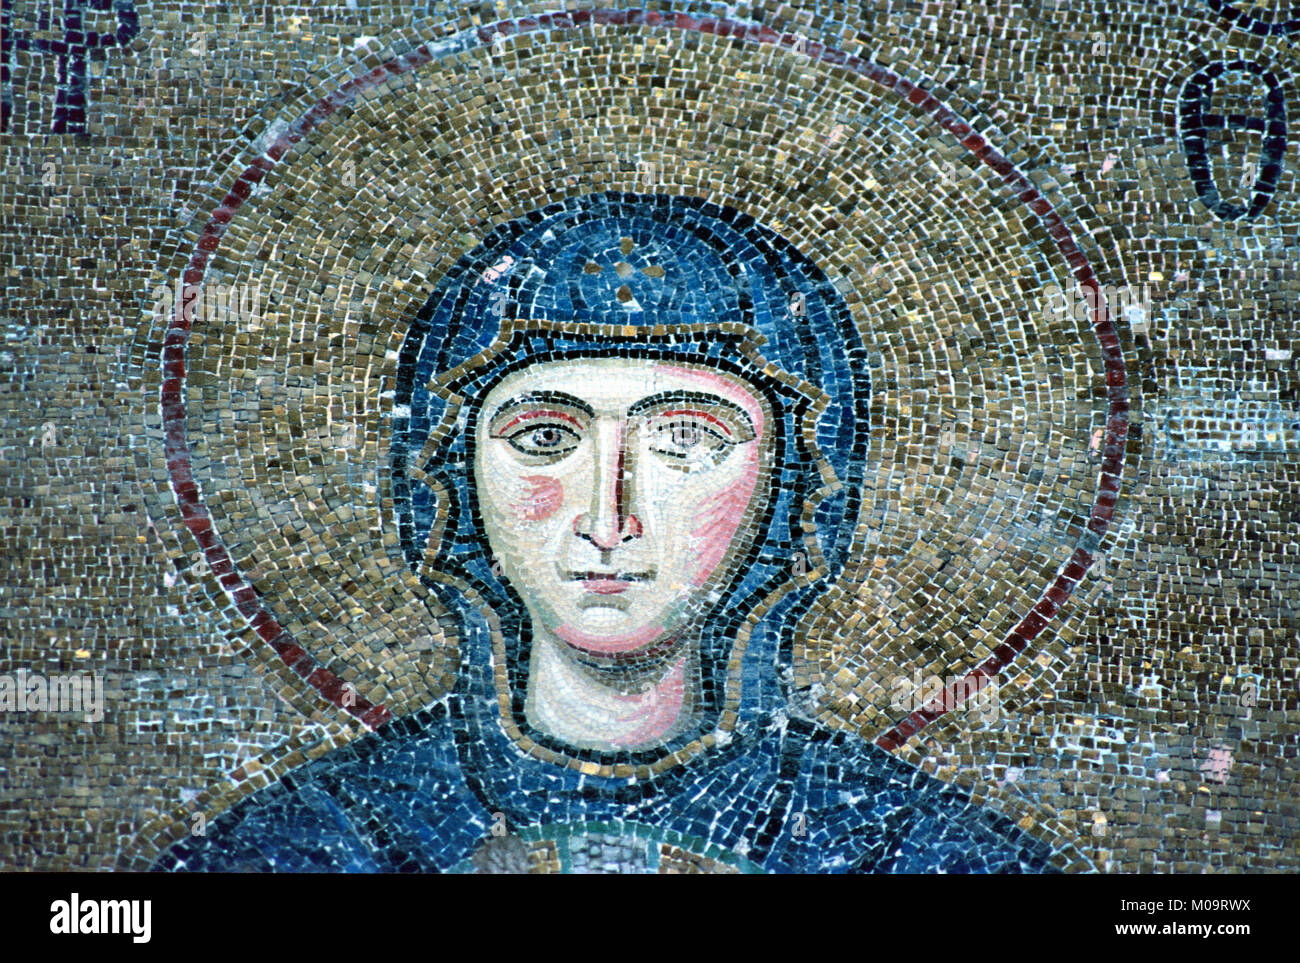 Byzantine Mosaic or Portrait of Virgin Mary in South Gallery of Hagia Sophia Church Museum, Sultanahmet, Istanbul, Turkey Stock Photo